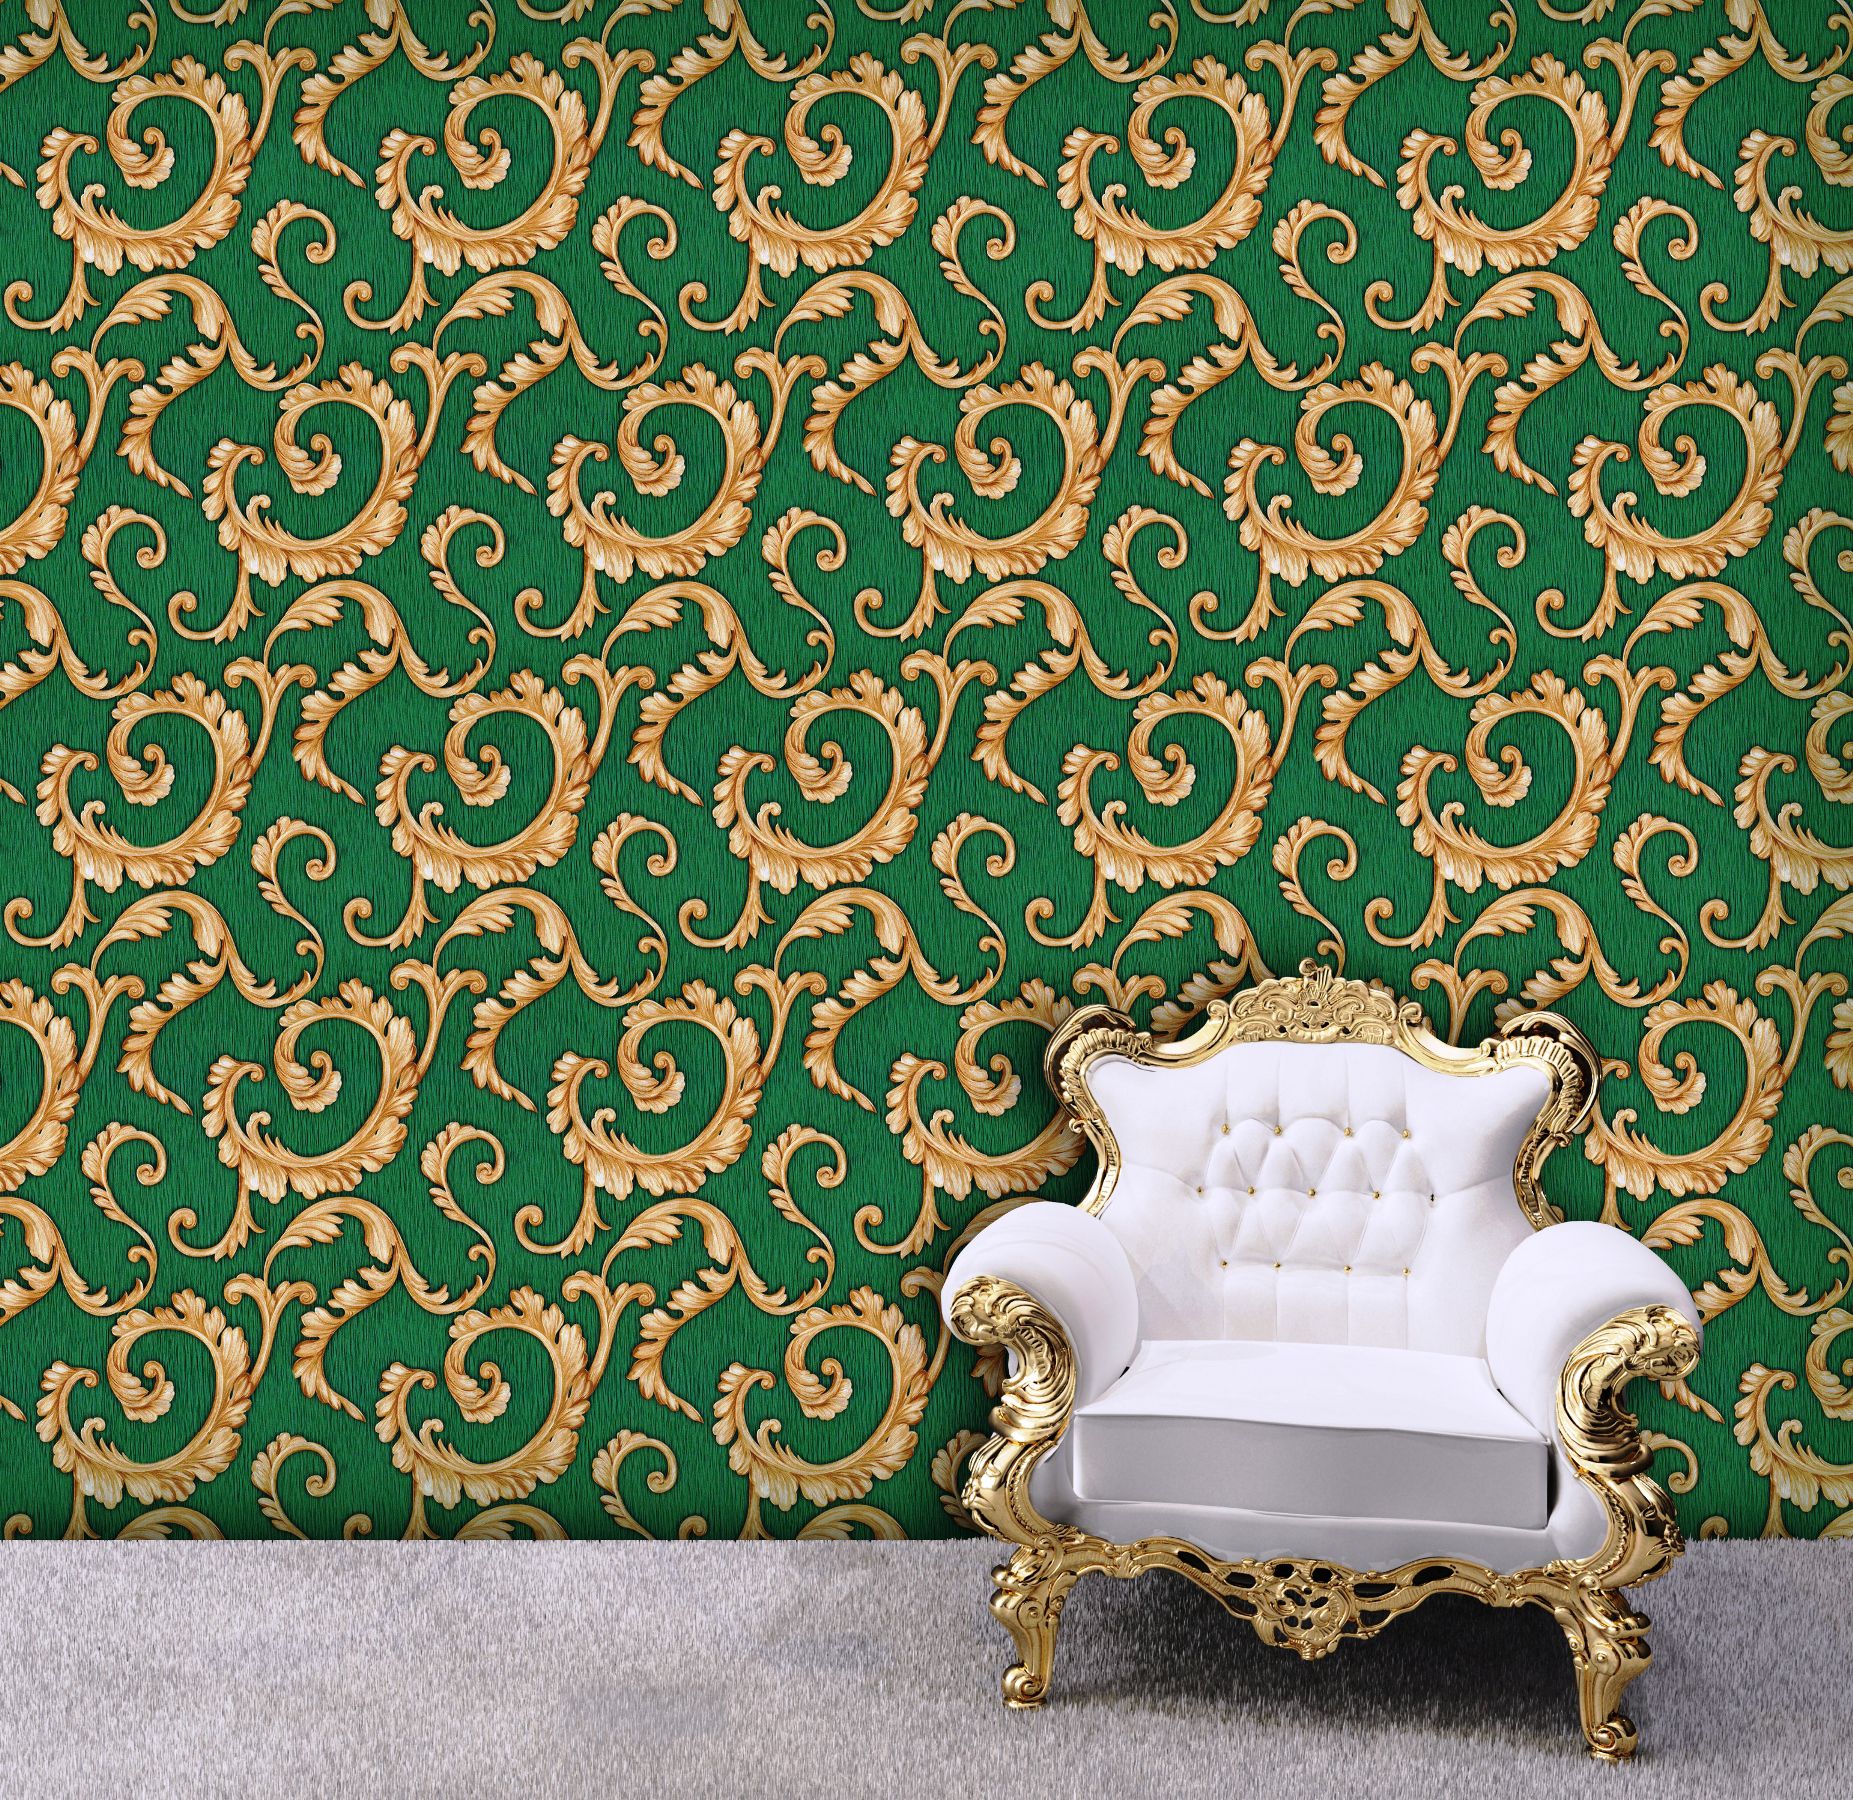 Green Textured Attractive Wallpaper Buy Green Textured Attractive Wallpaper  at Best Price in India on Snapdeal